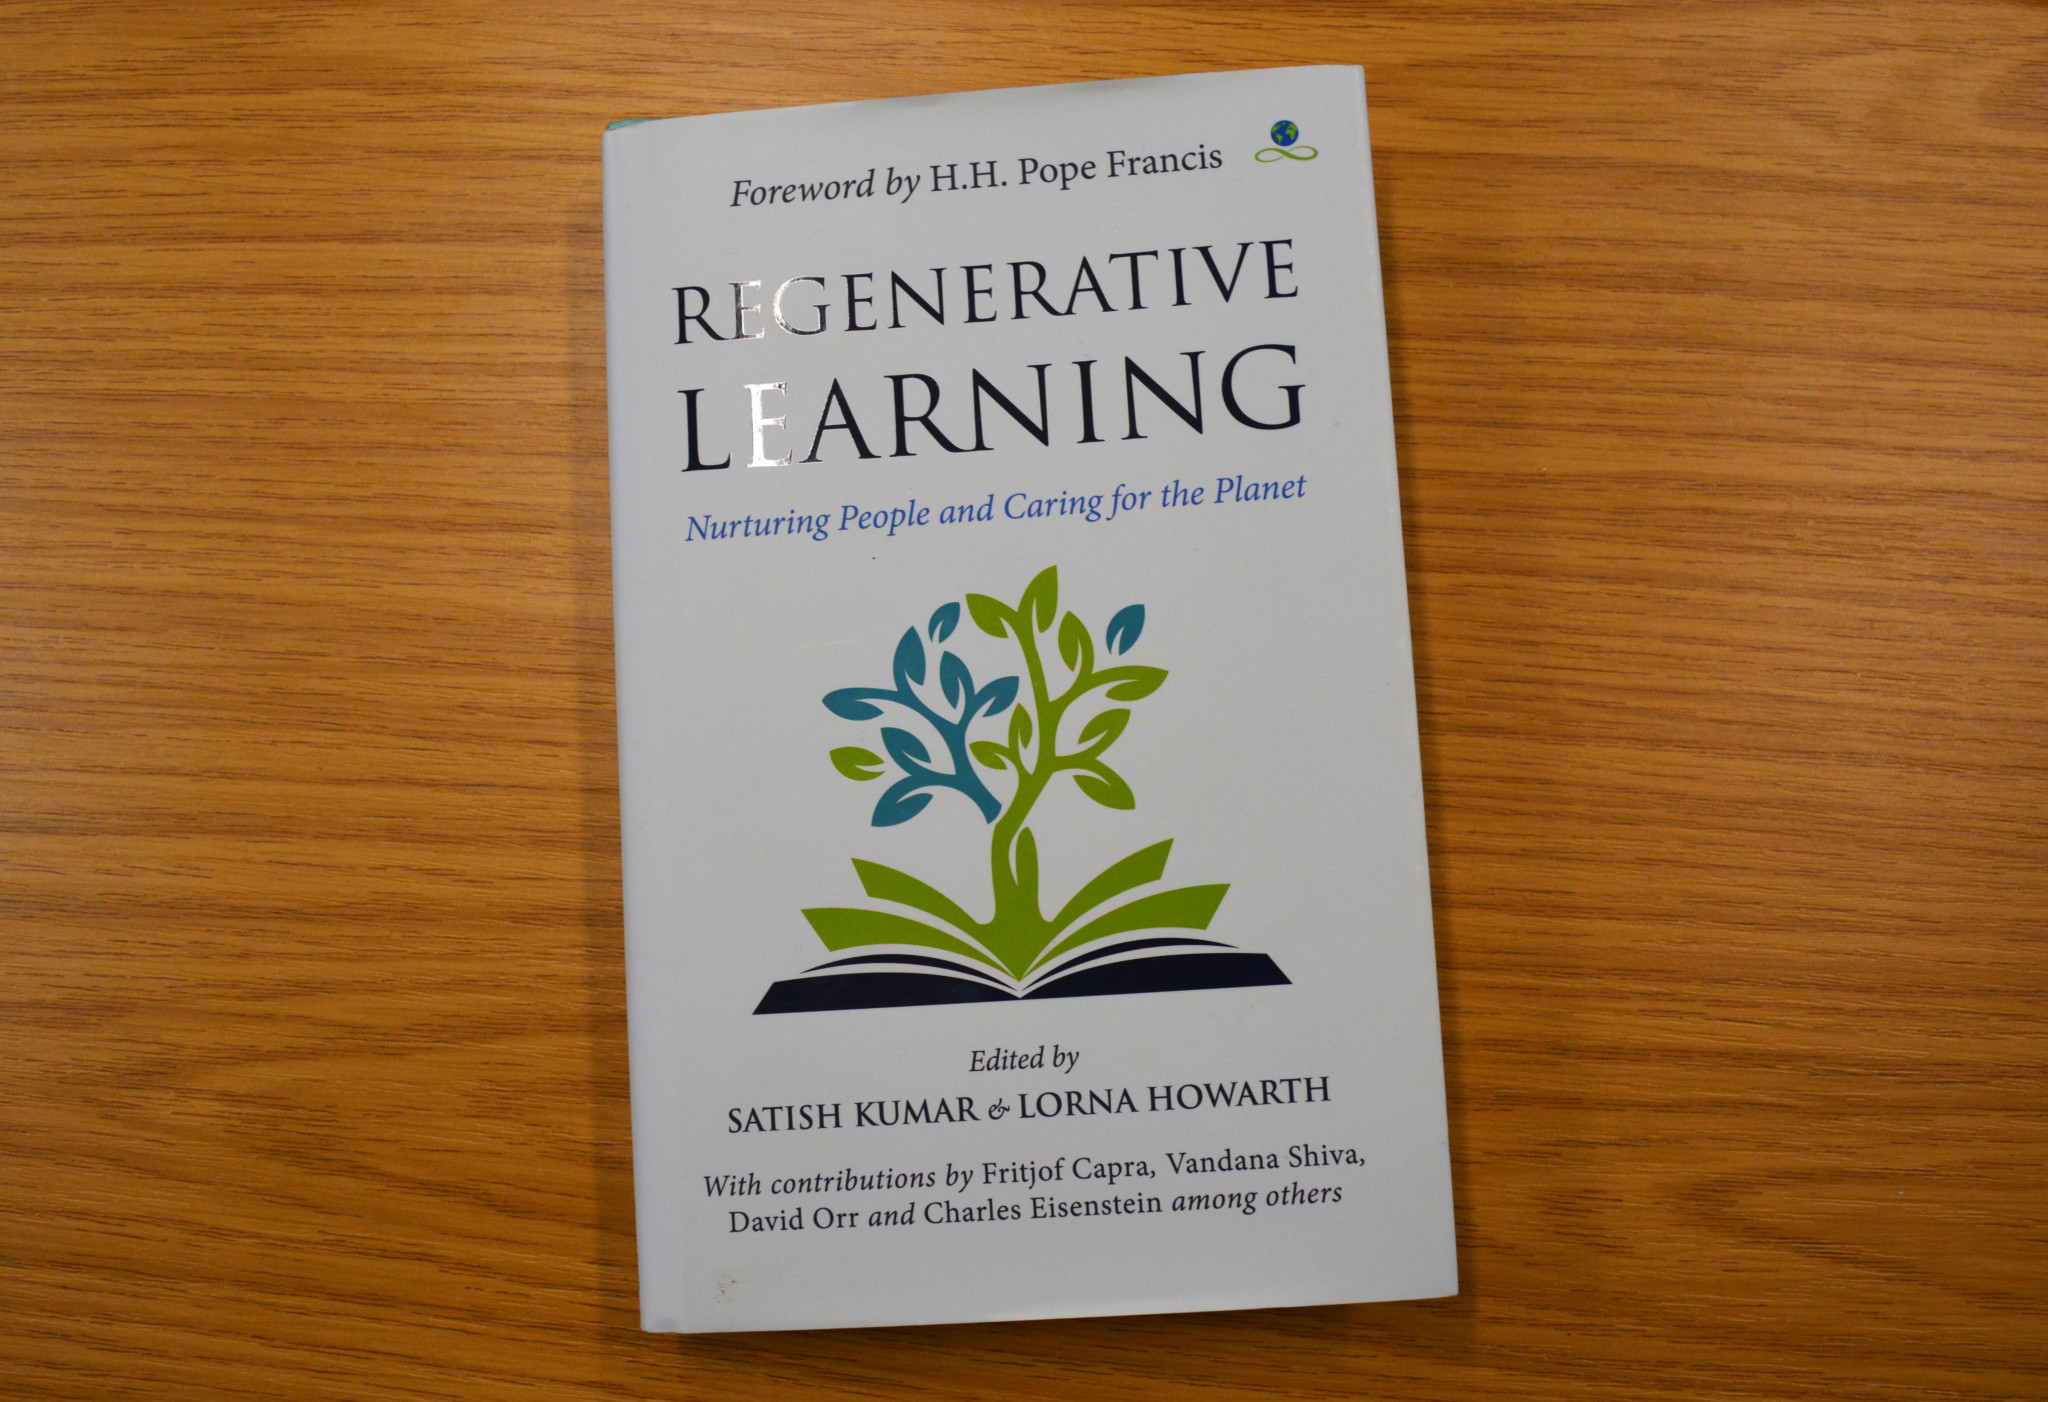 Sustainability Book Reviews #5: Regenerative Learning